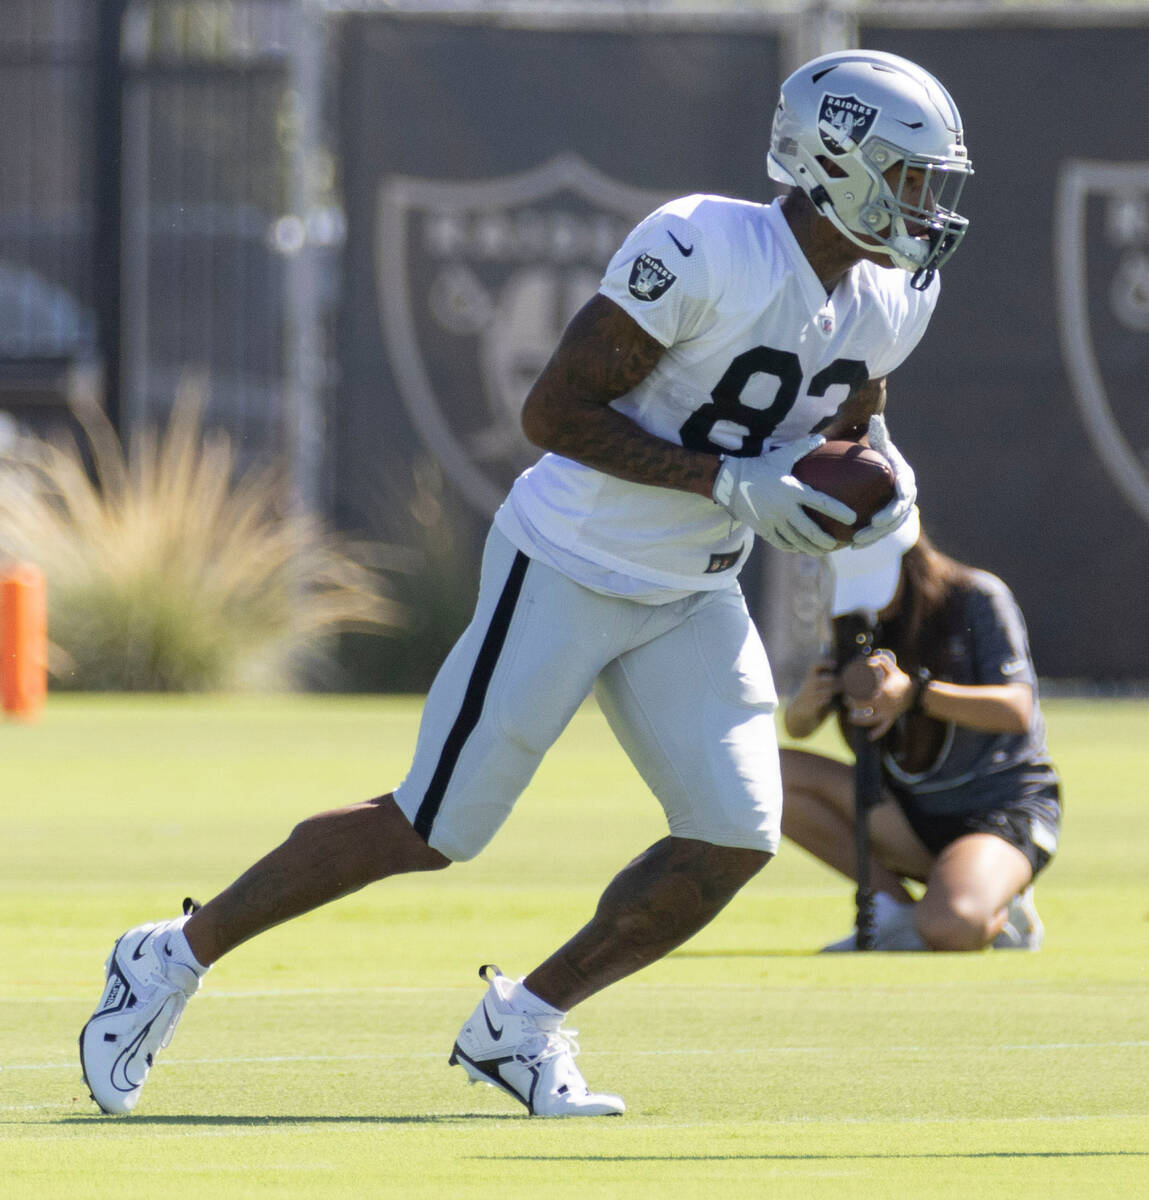 Raiders tight end Darren Waller (83) makes a catch during the team’s training camp pract ...